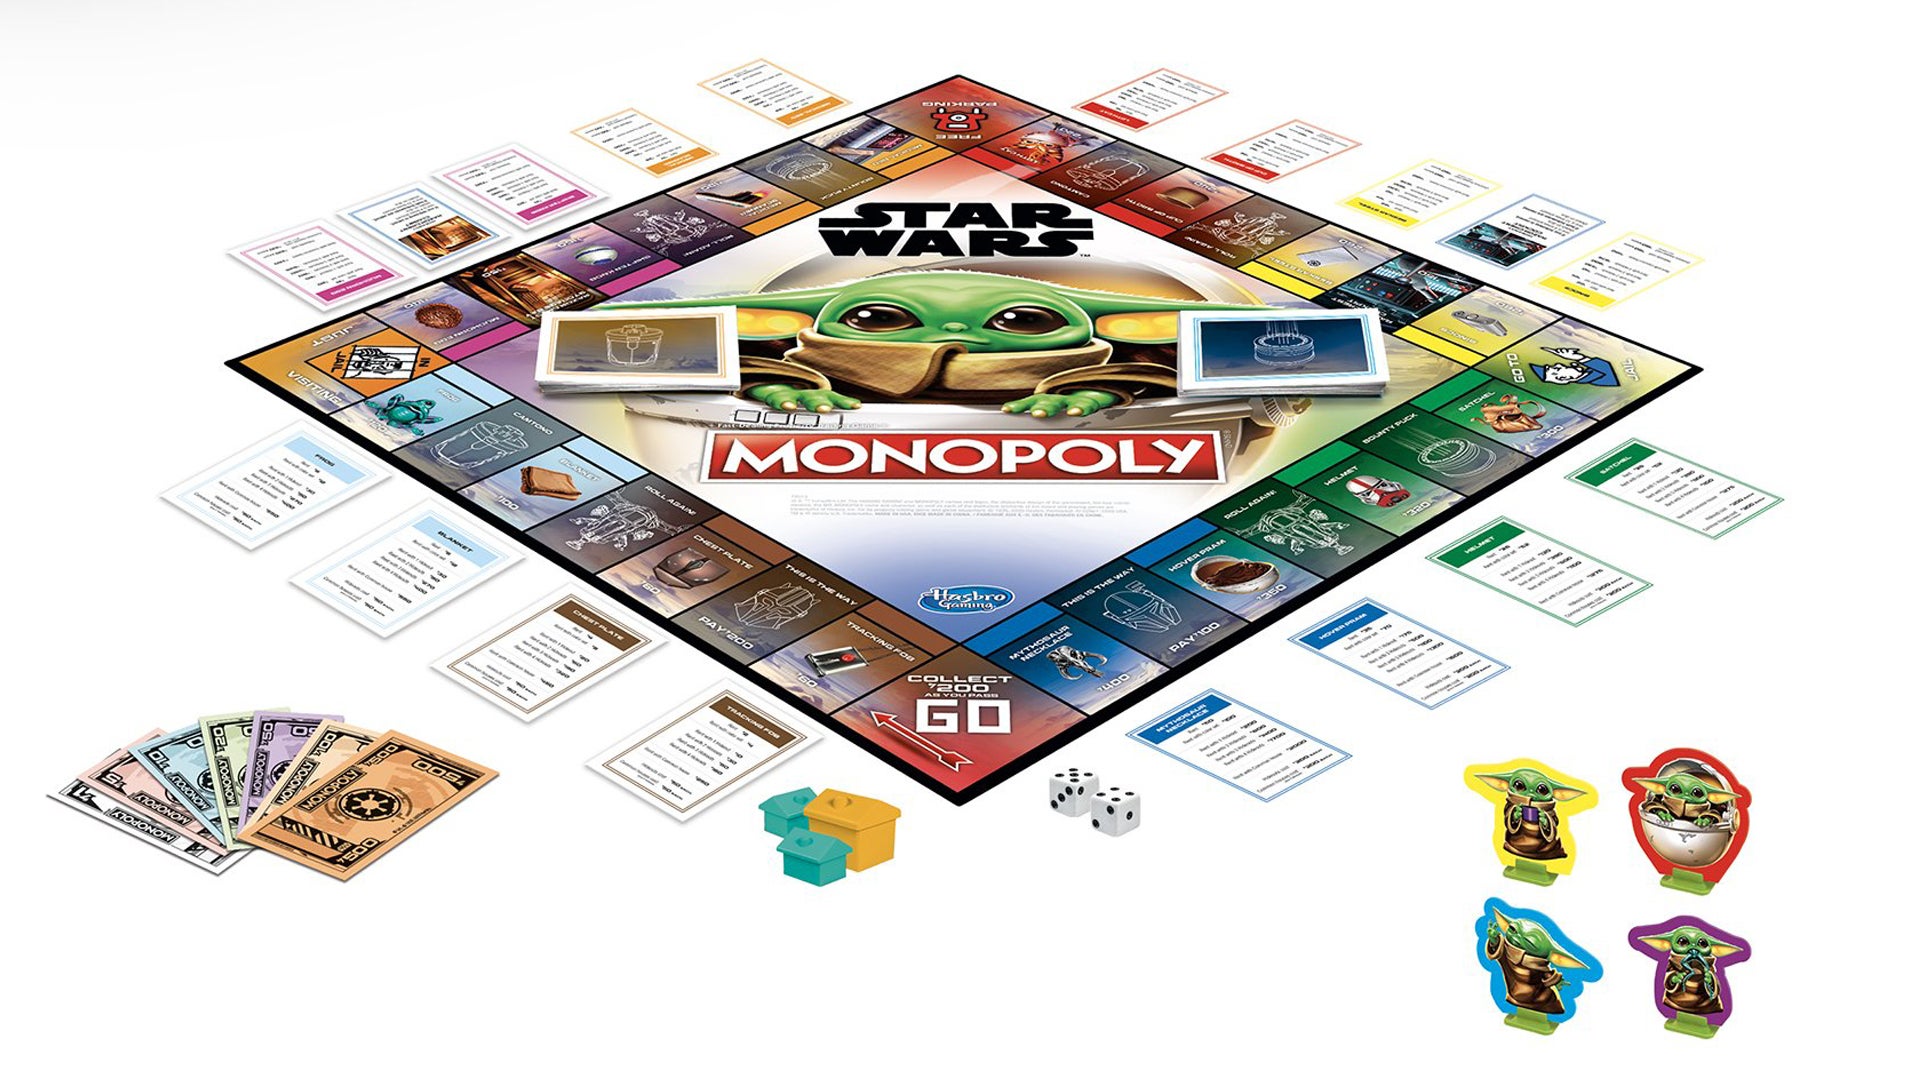 Monopoly Star Wars: The Child board game layout